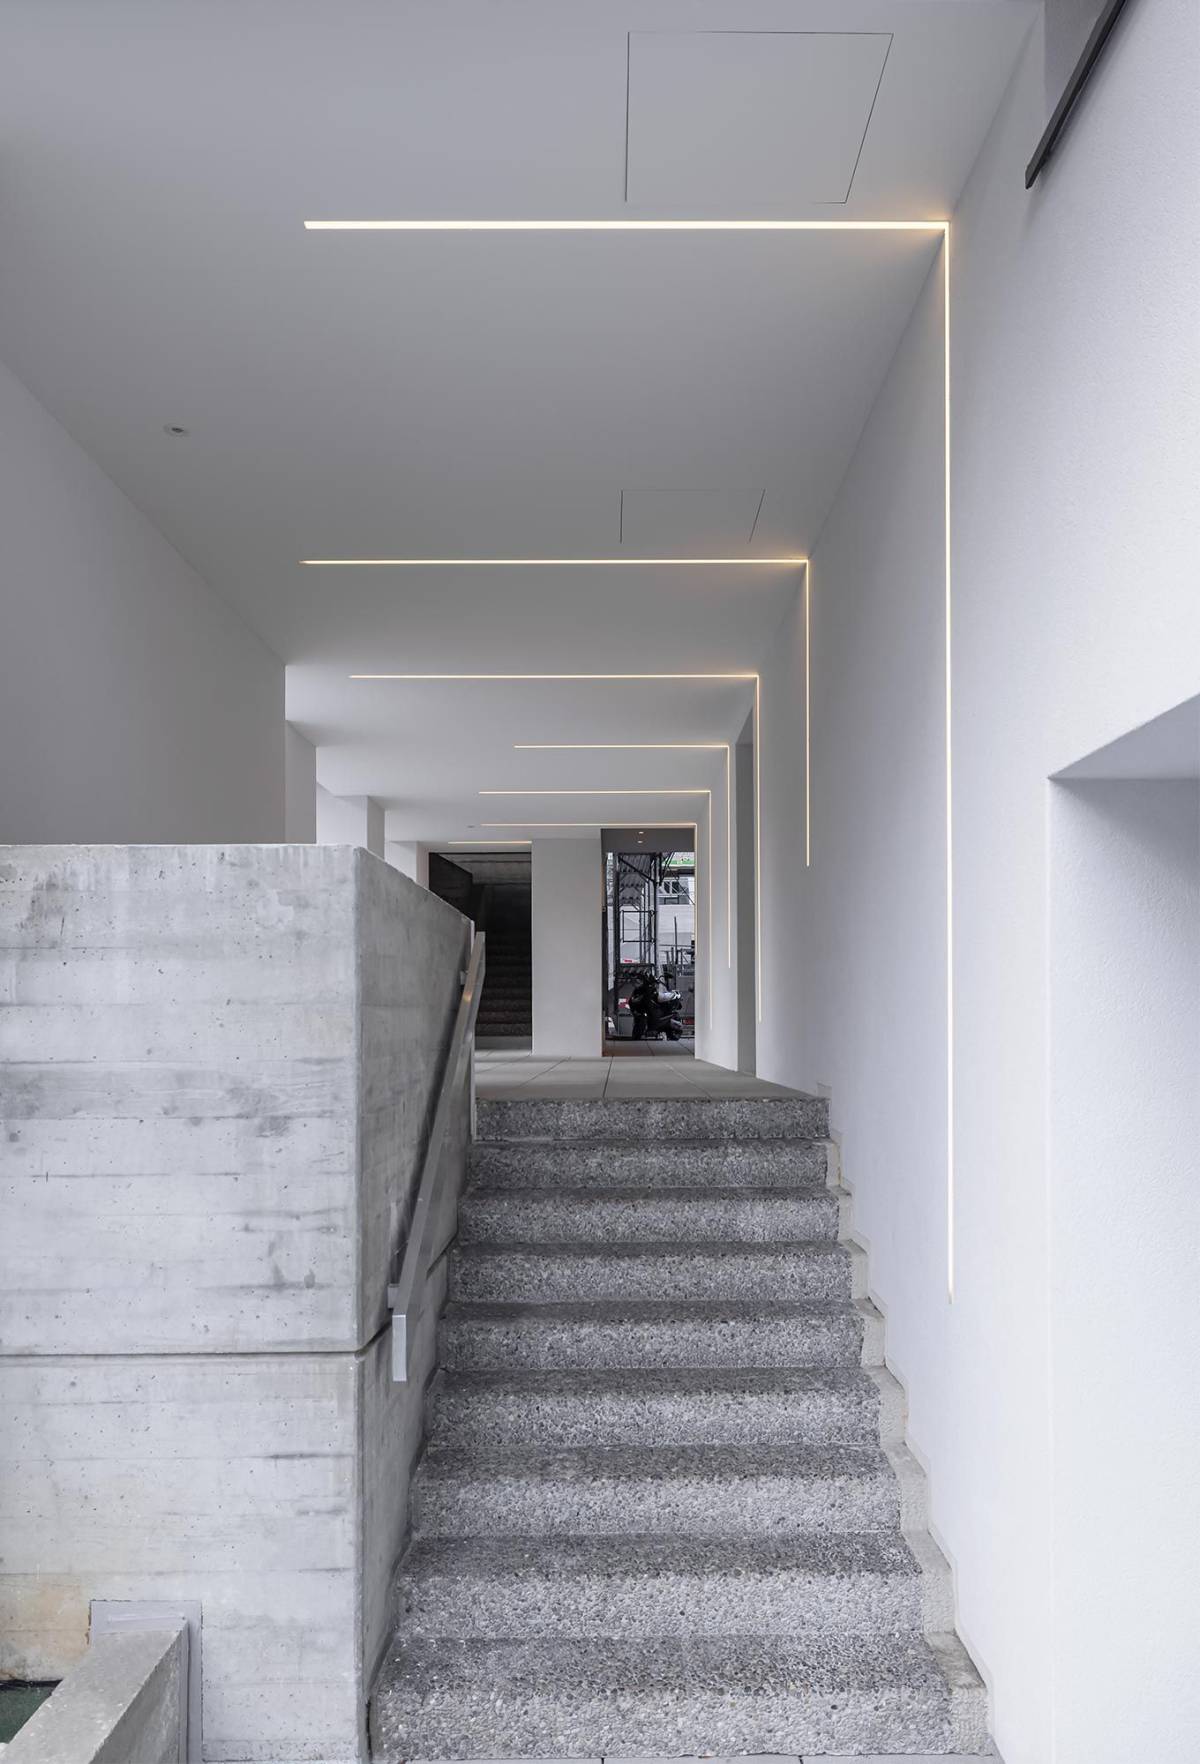 Recessed linear LED profiles for modern lighting in architecture